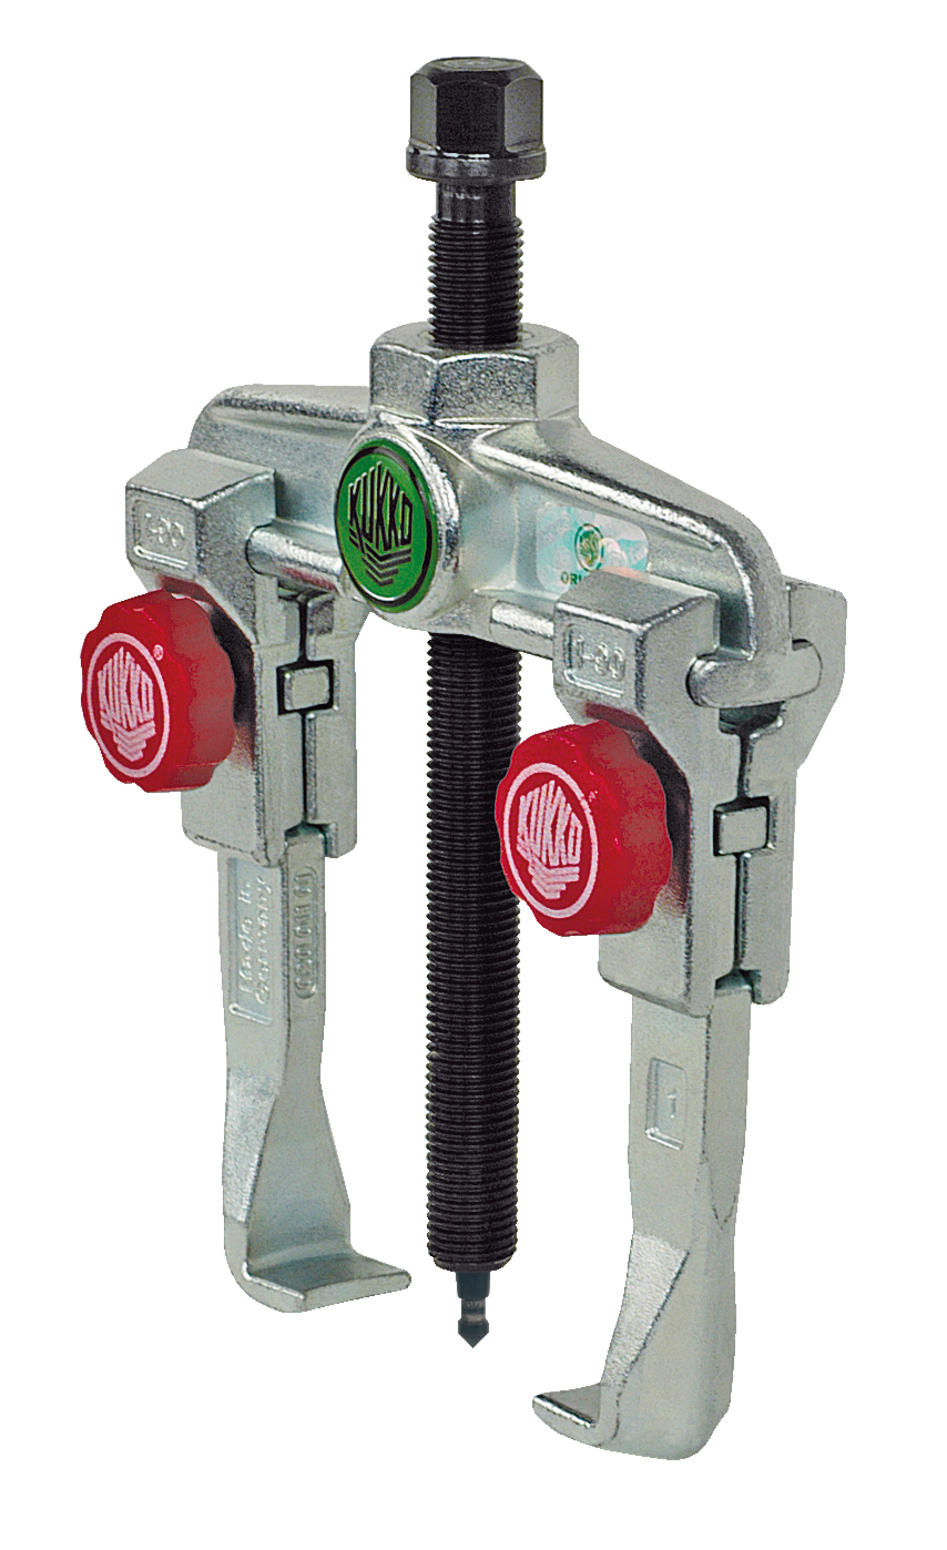 The 2-arm universal puller 20+ with quick-adjustable trigger hooks